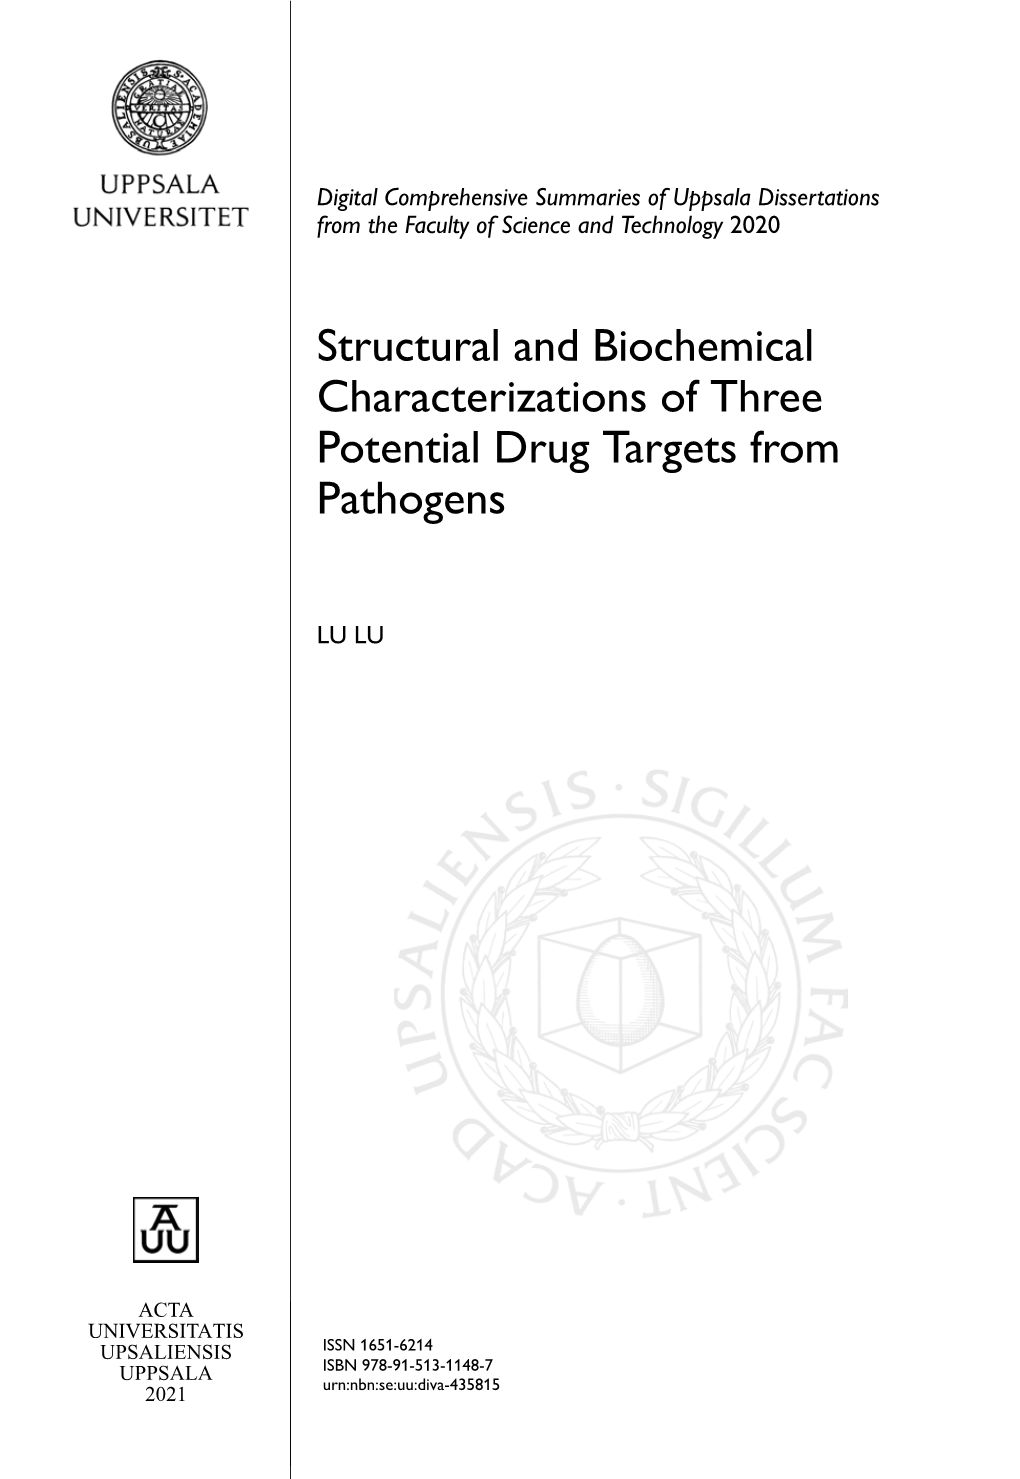 Structural and Biochemical Characterizations of Three Potential Drug Targets from Pathogens